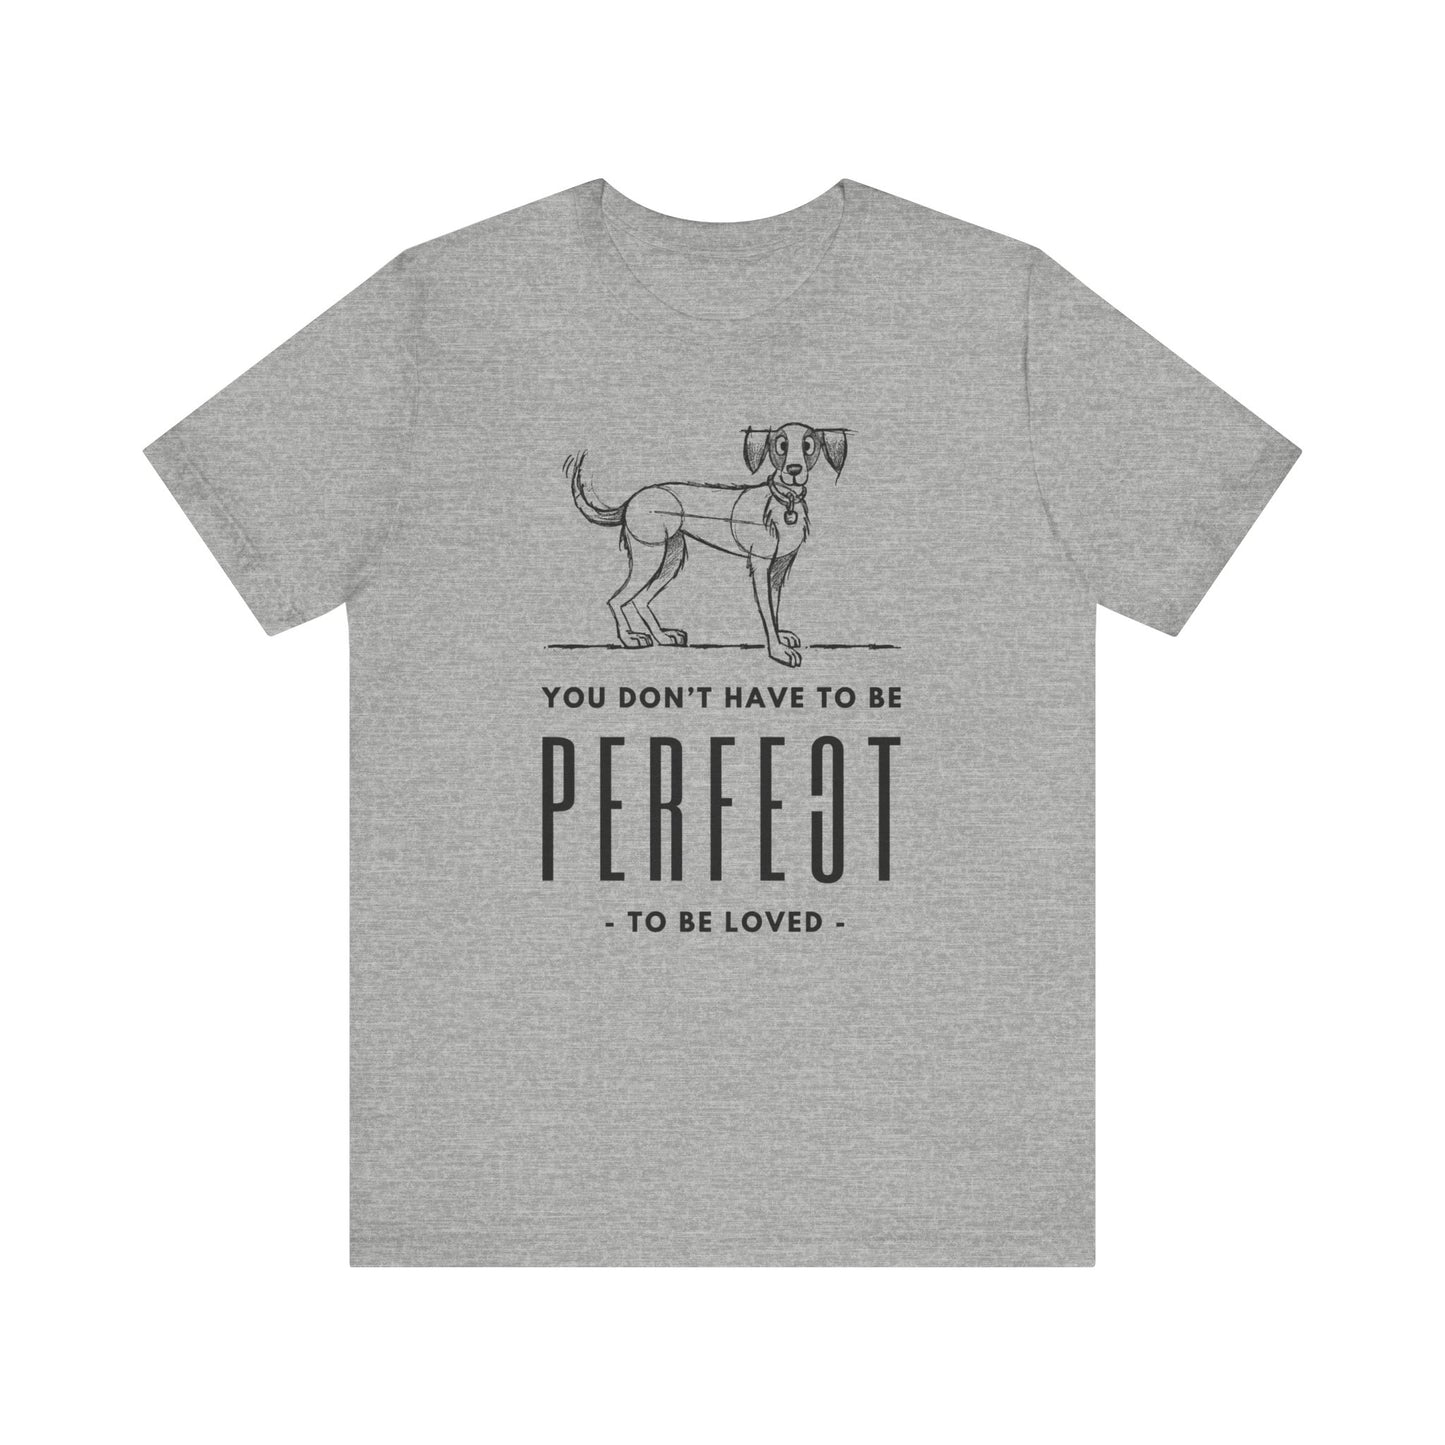  The Dogs Pure Love heather grey unisex t-shirt boldly showcases the slogan 'You don't have to be perfect to be loved,' against a white backdrop.